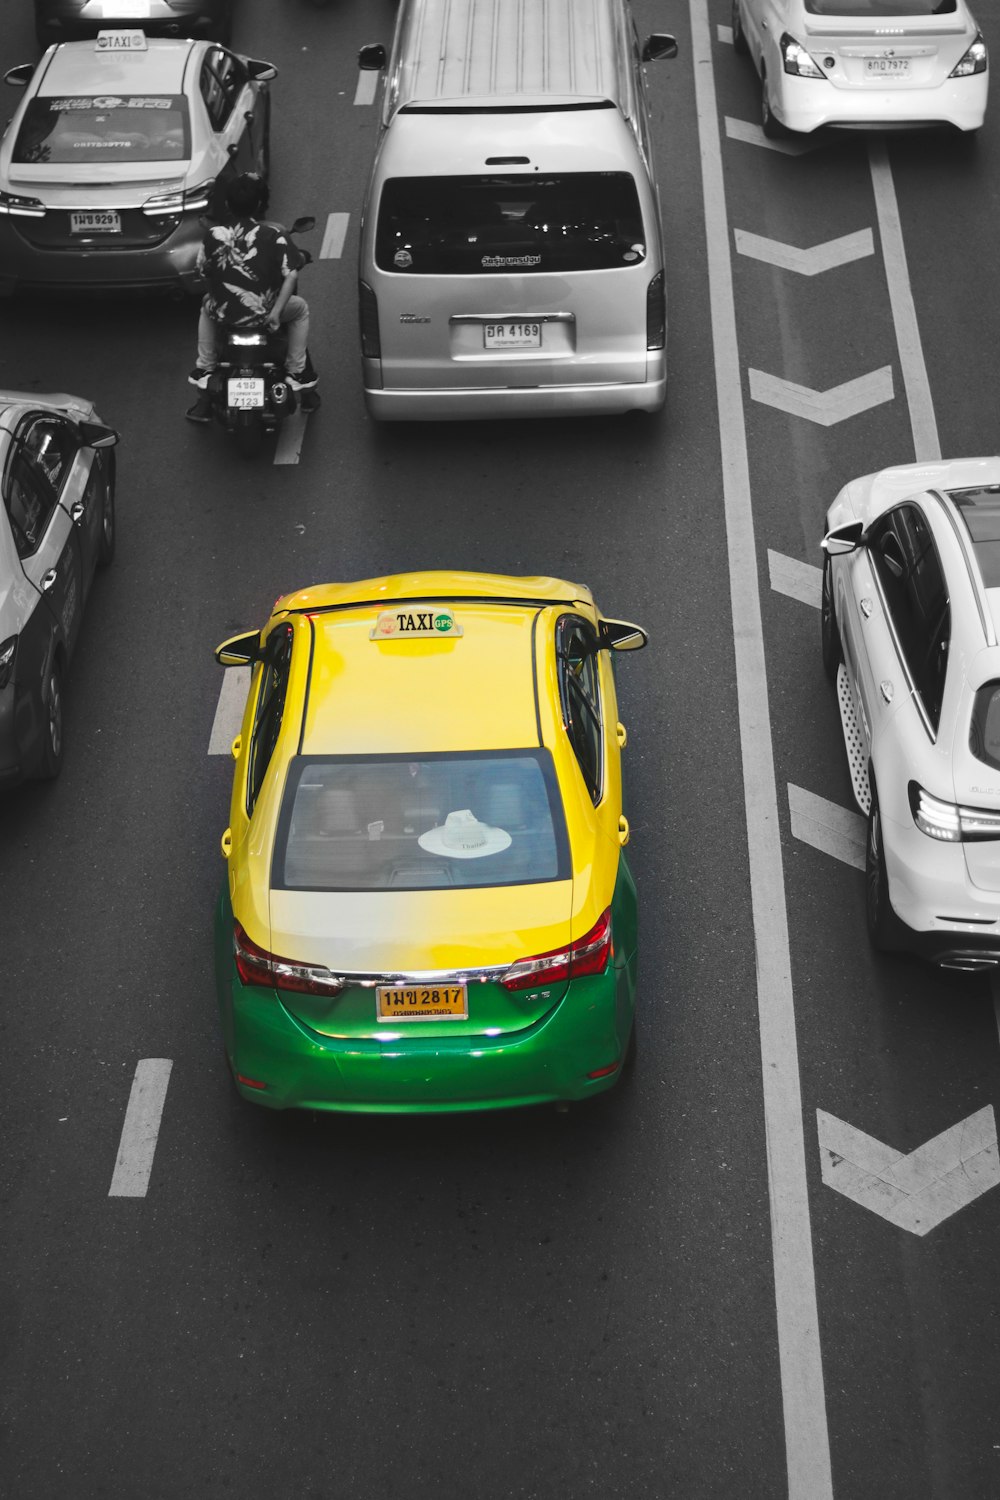 a yellow and green taxi cab driving down a street